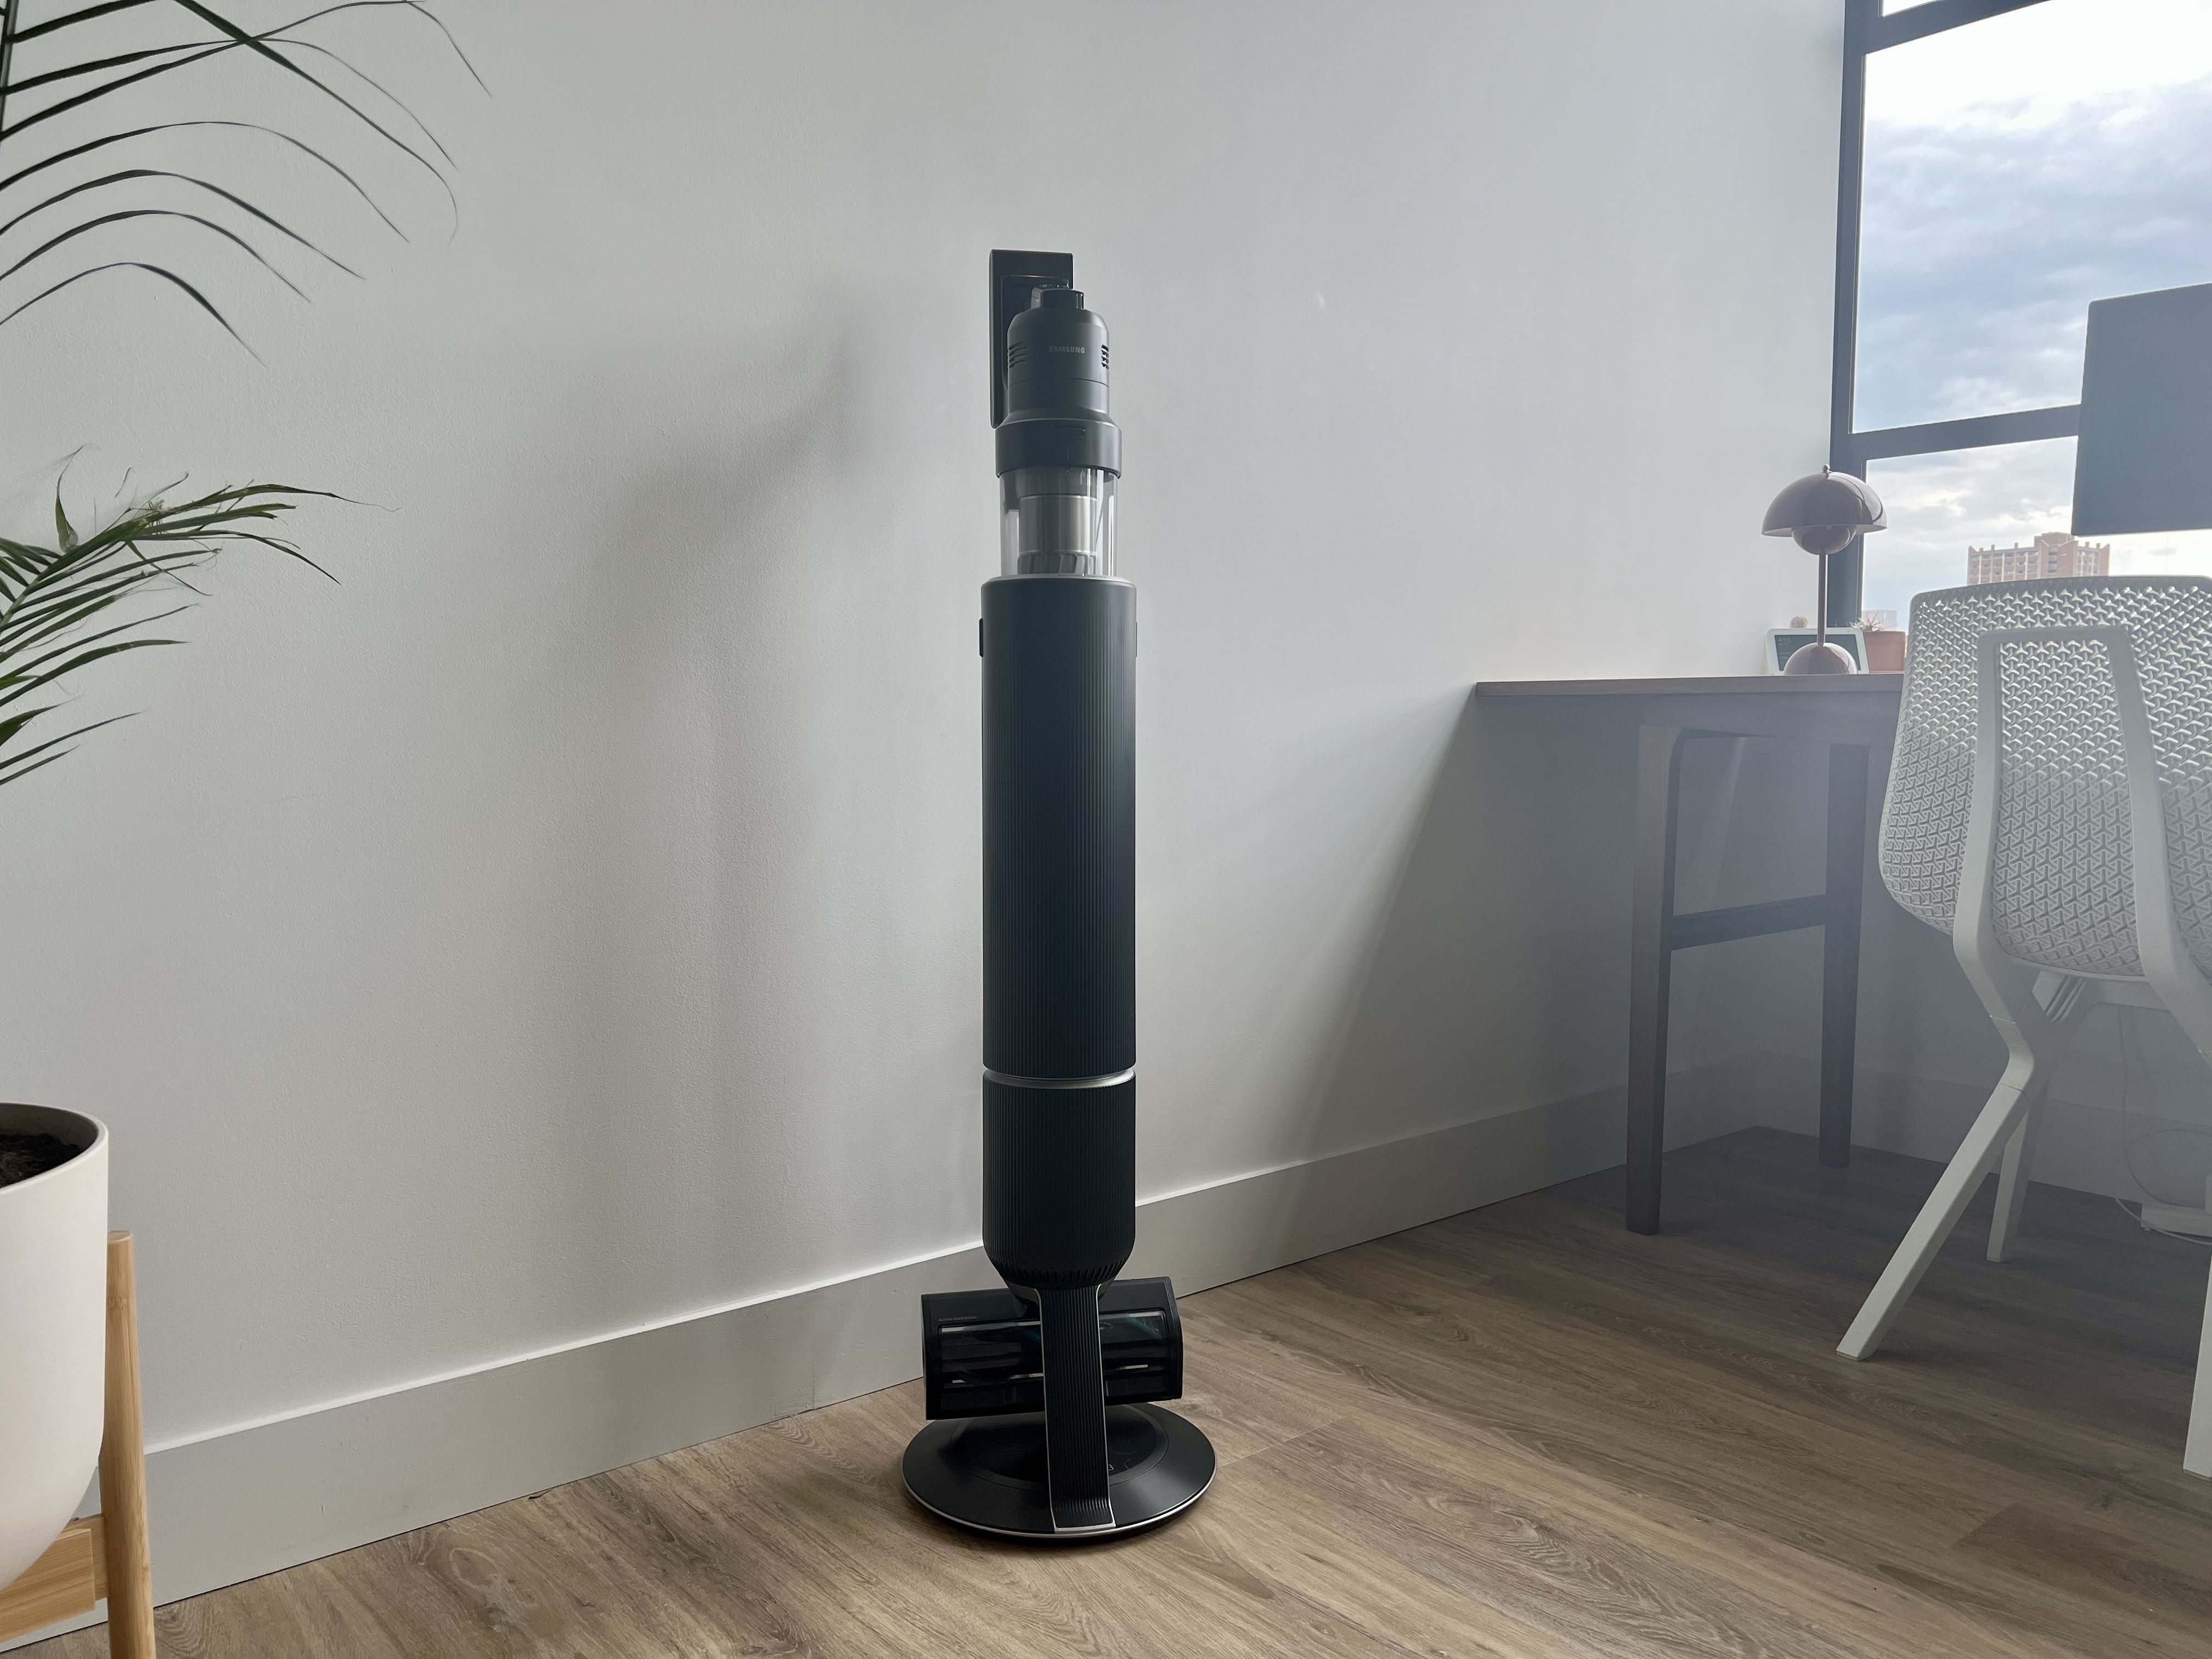 Anoi Industrial delay Samsung Bespoke Jet AI Review: A Stick Vacuum with Beauty & Brains